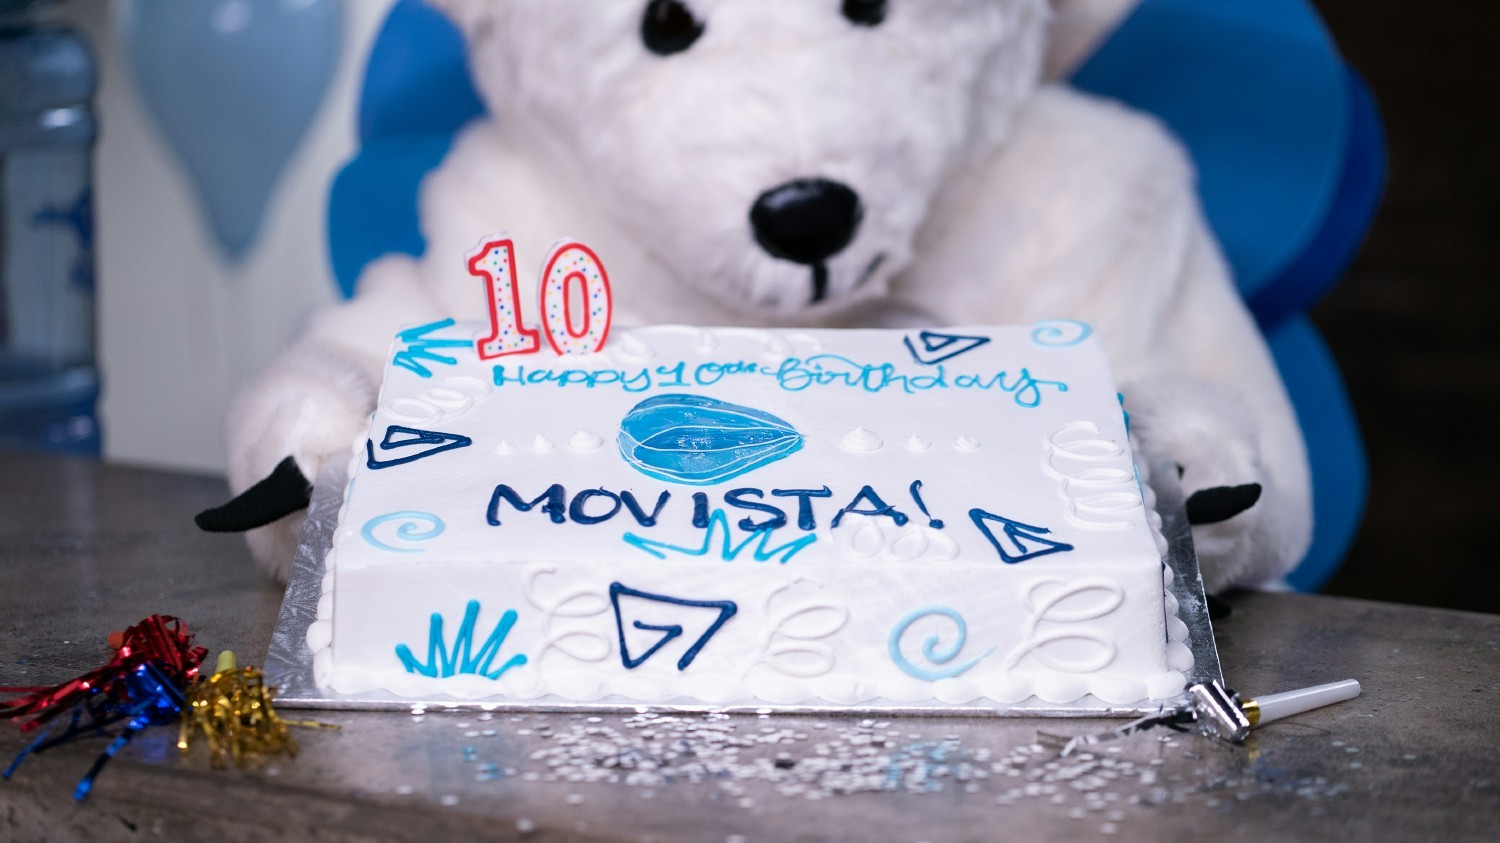 Movista hit 10 year's old, and we celebrated with our one and only mascot, Mo!